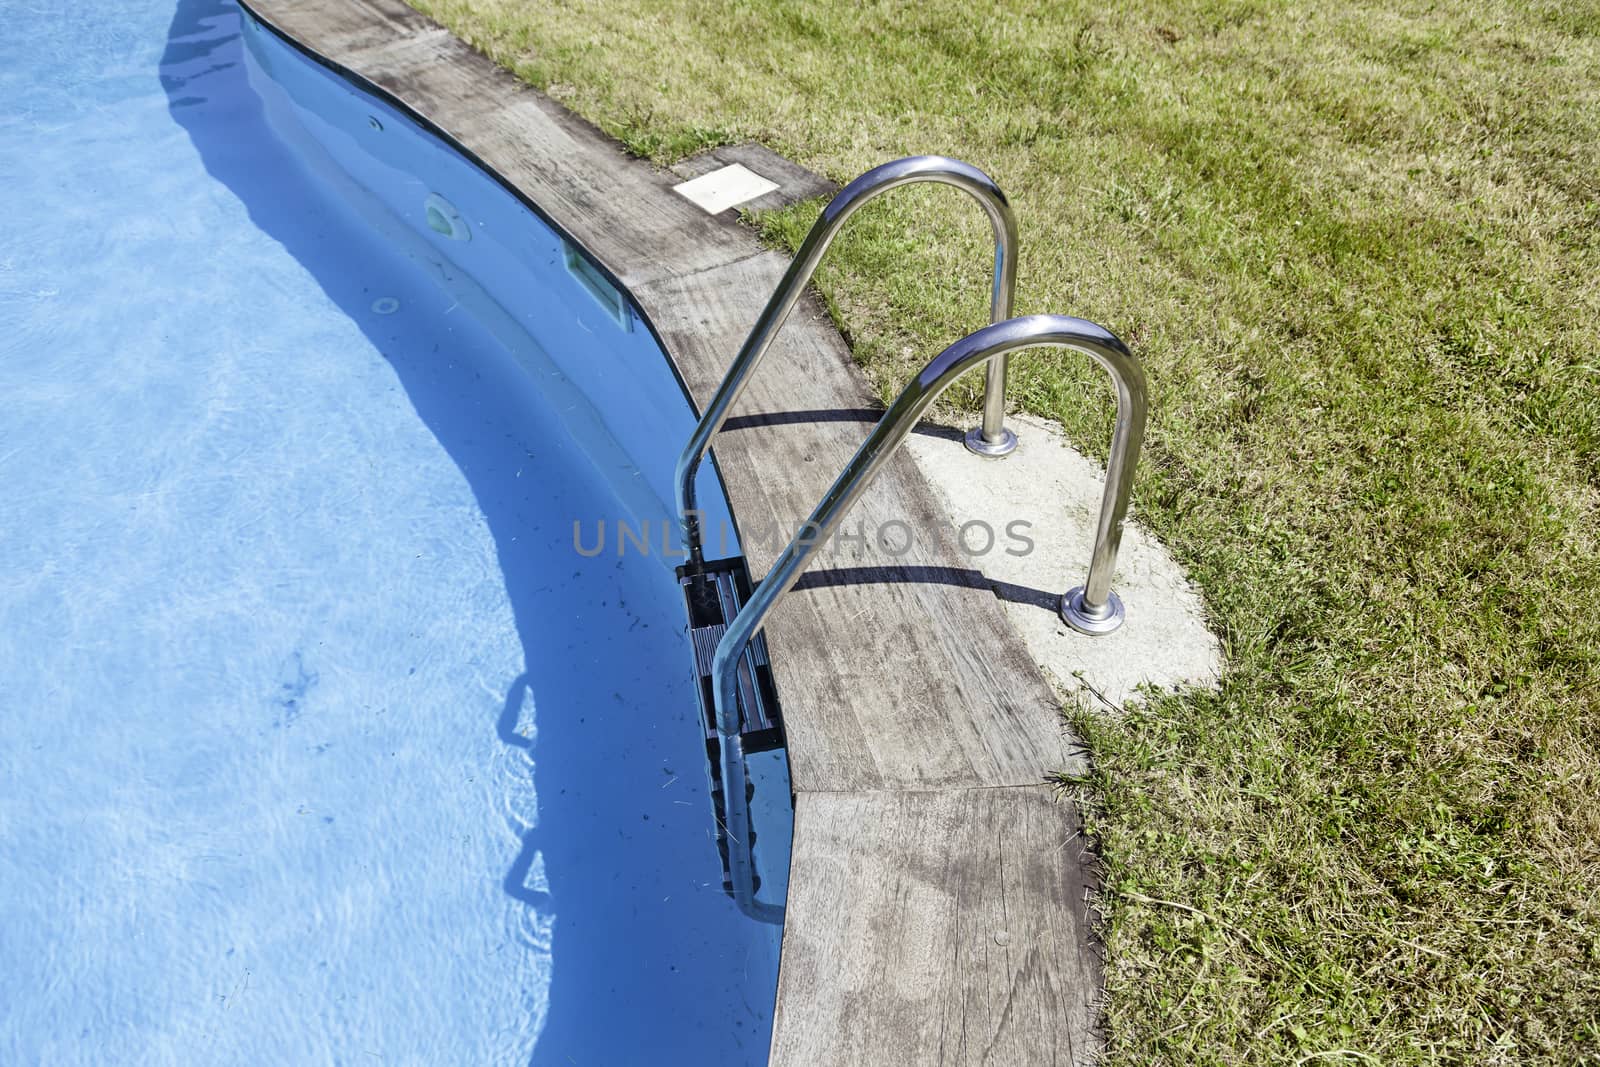 Swimming and railing, detail of a summer swimming pool, sport and fun, August